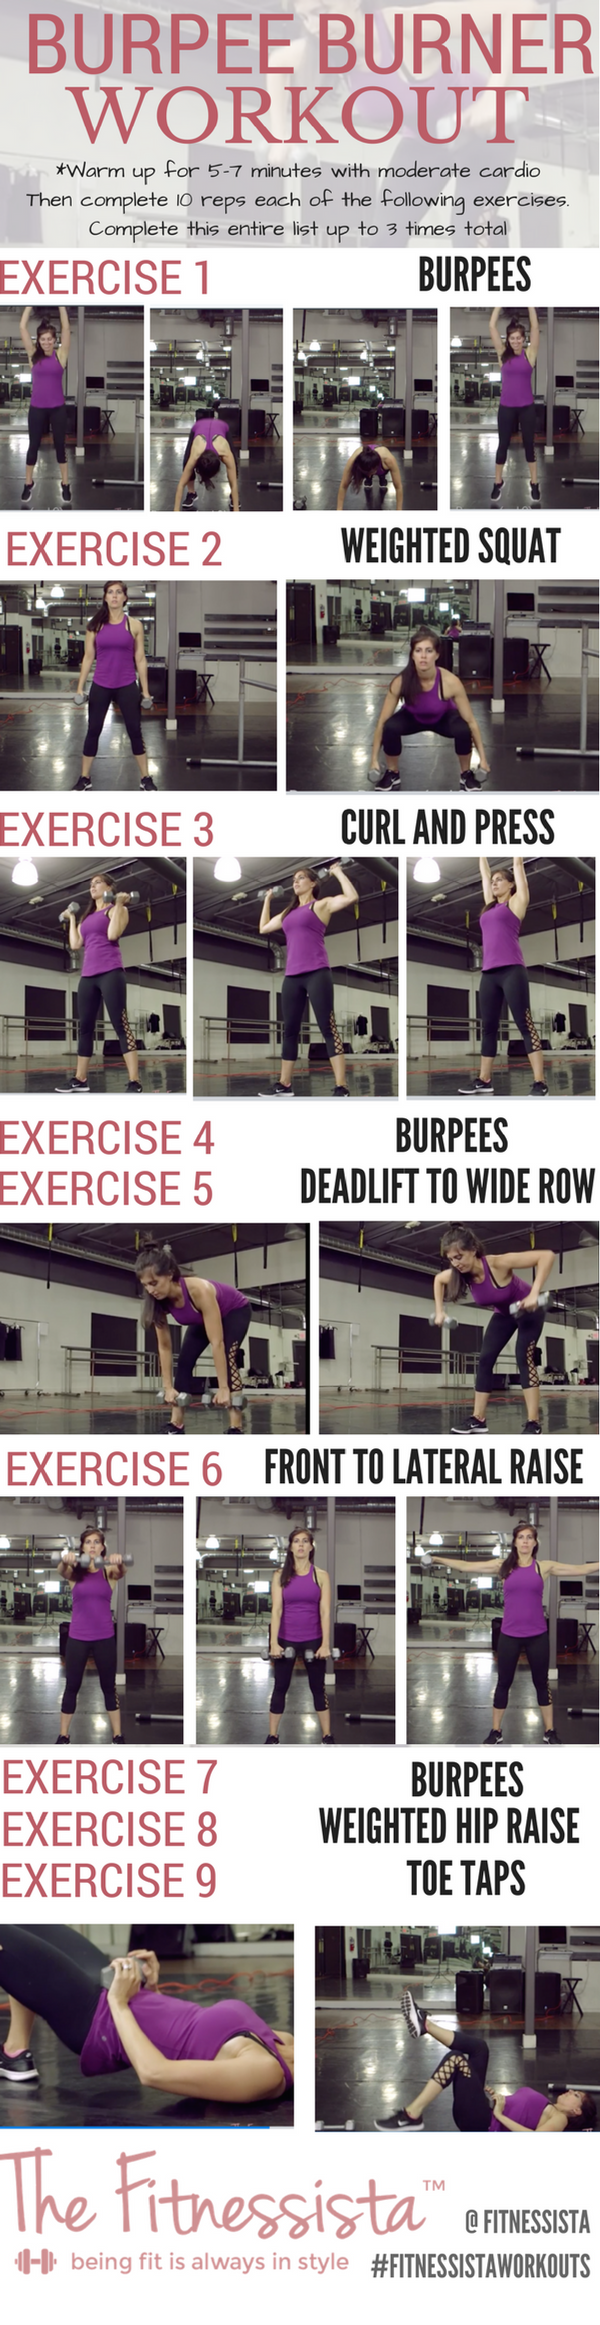 A total body burpee workout! Burpee blasts will fire up your heat rate and burn major calories. Save for the next time you want a killer strength and cardio workout! fitnessista.com